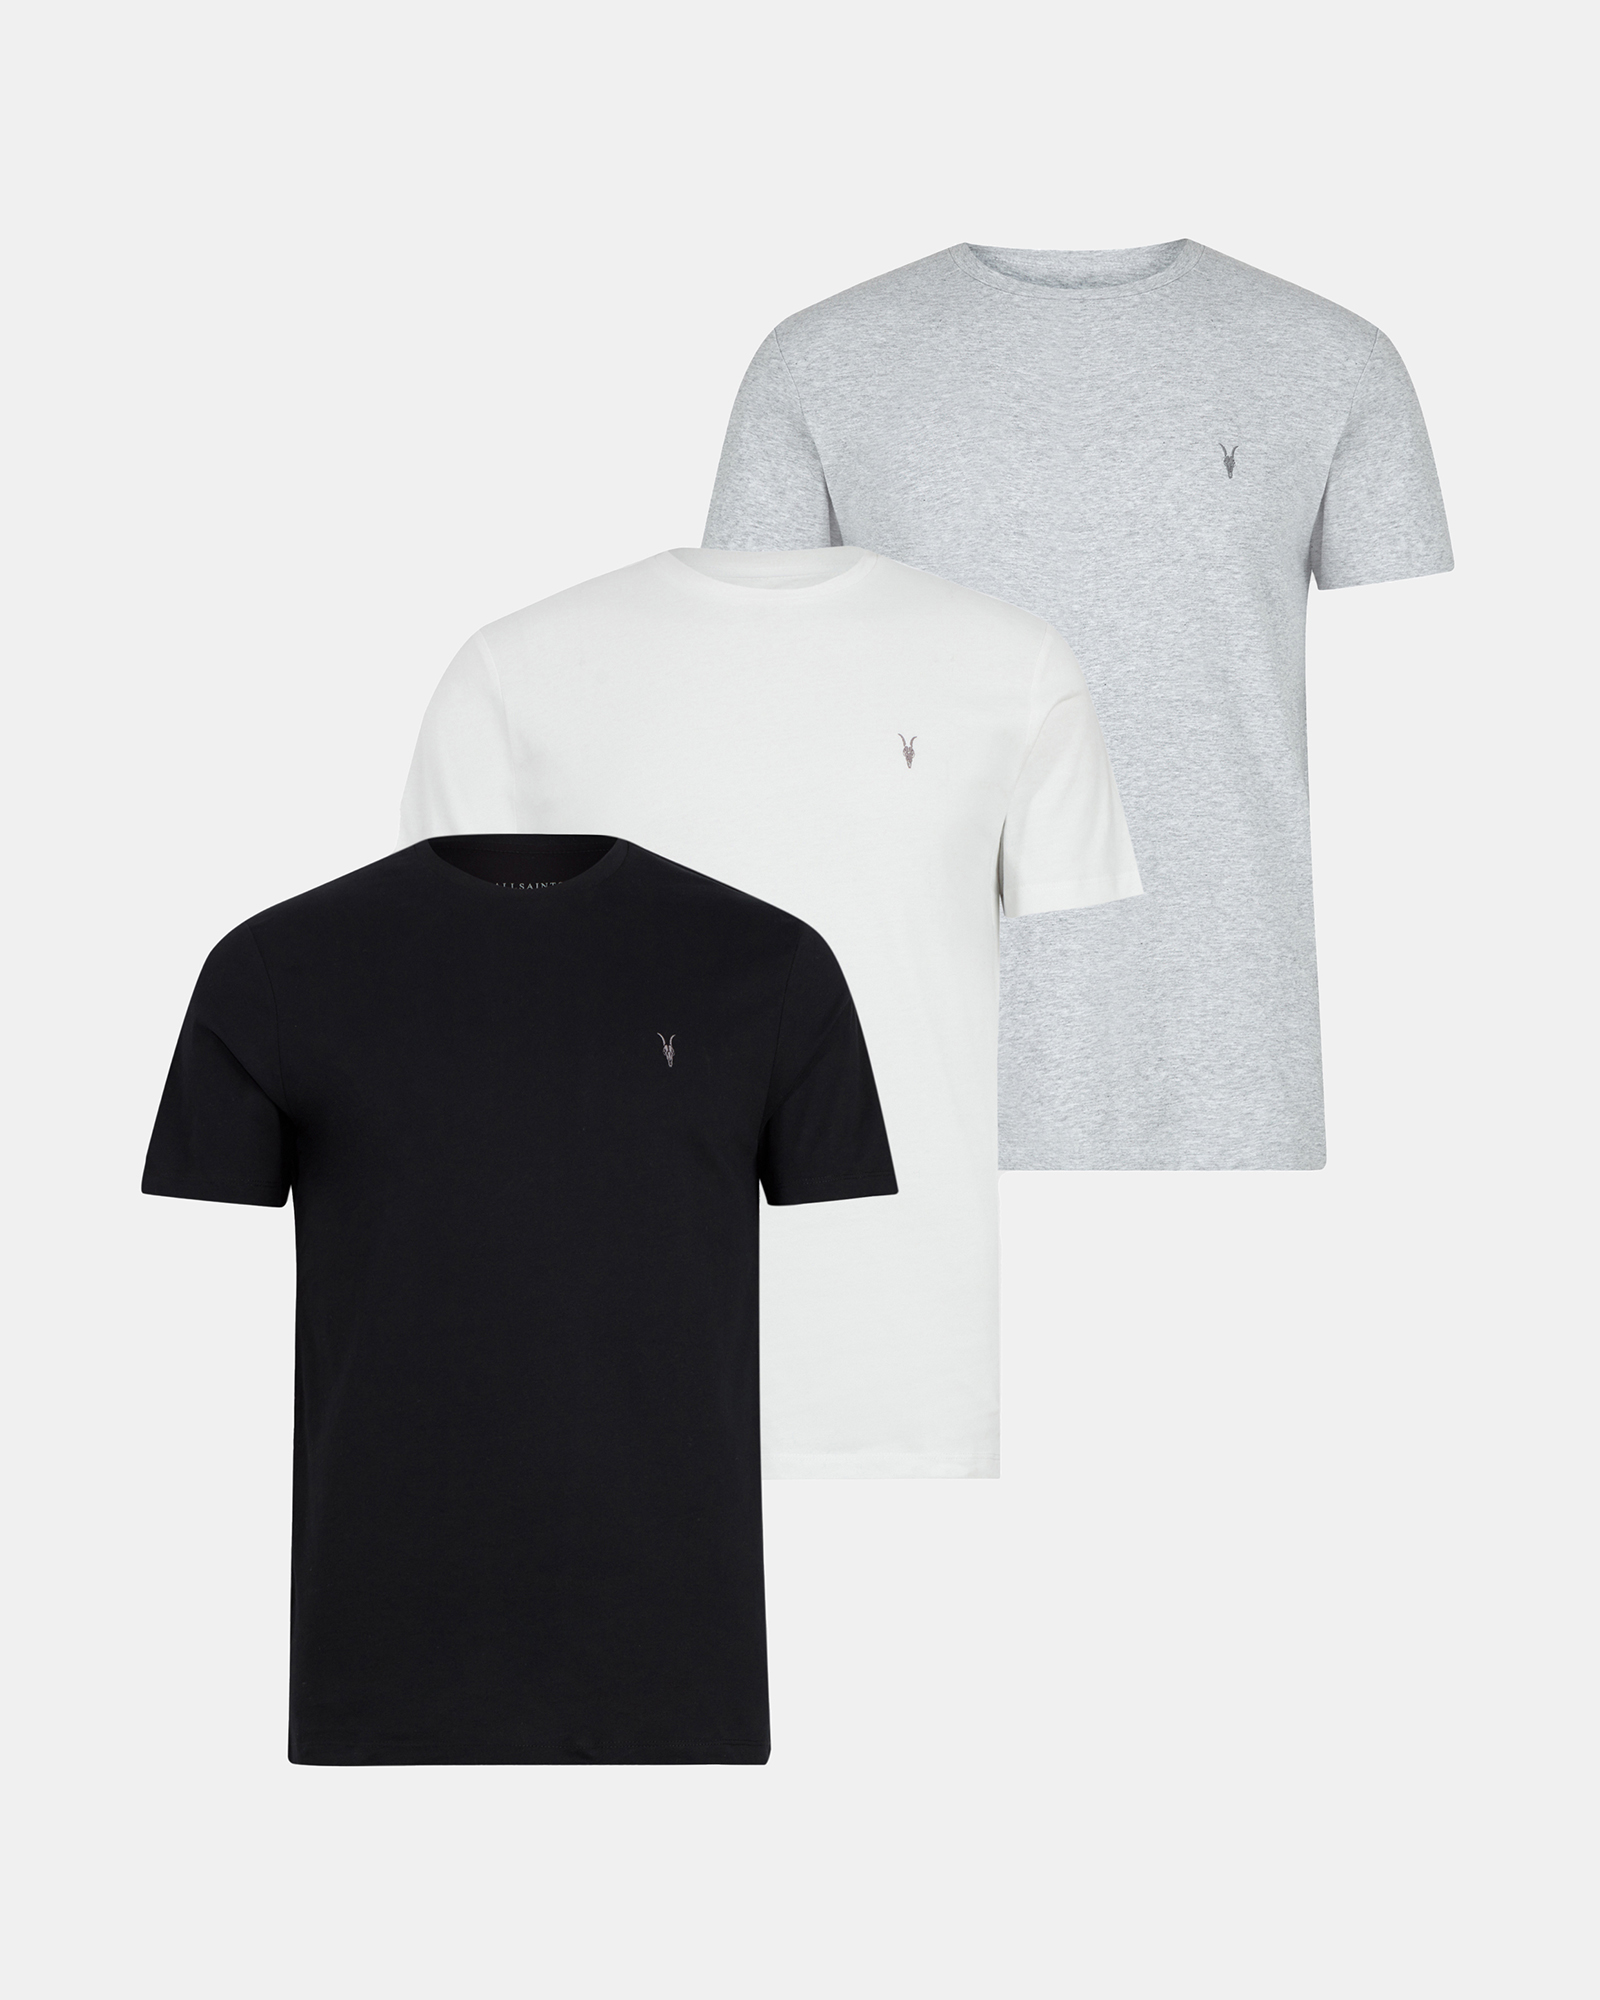 AllSaints Size: L Men's Slim Fit Pack of 3 Short Sleeve Tonic Crew T-Shirts, White, Black and Grey